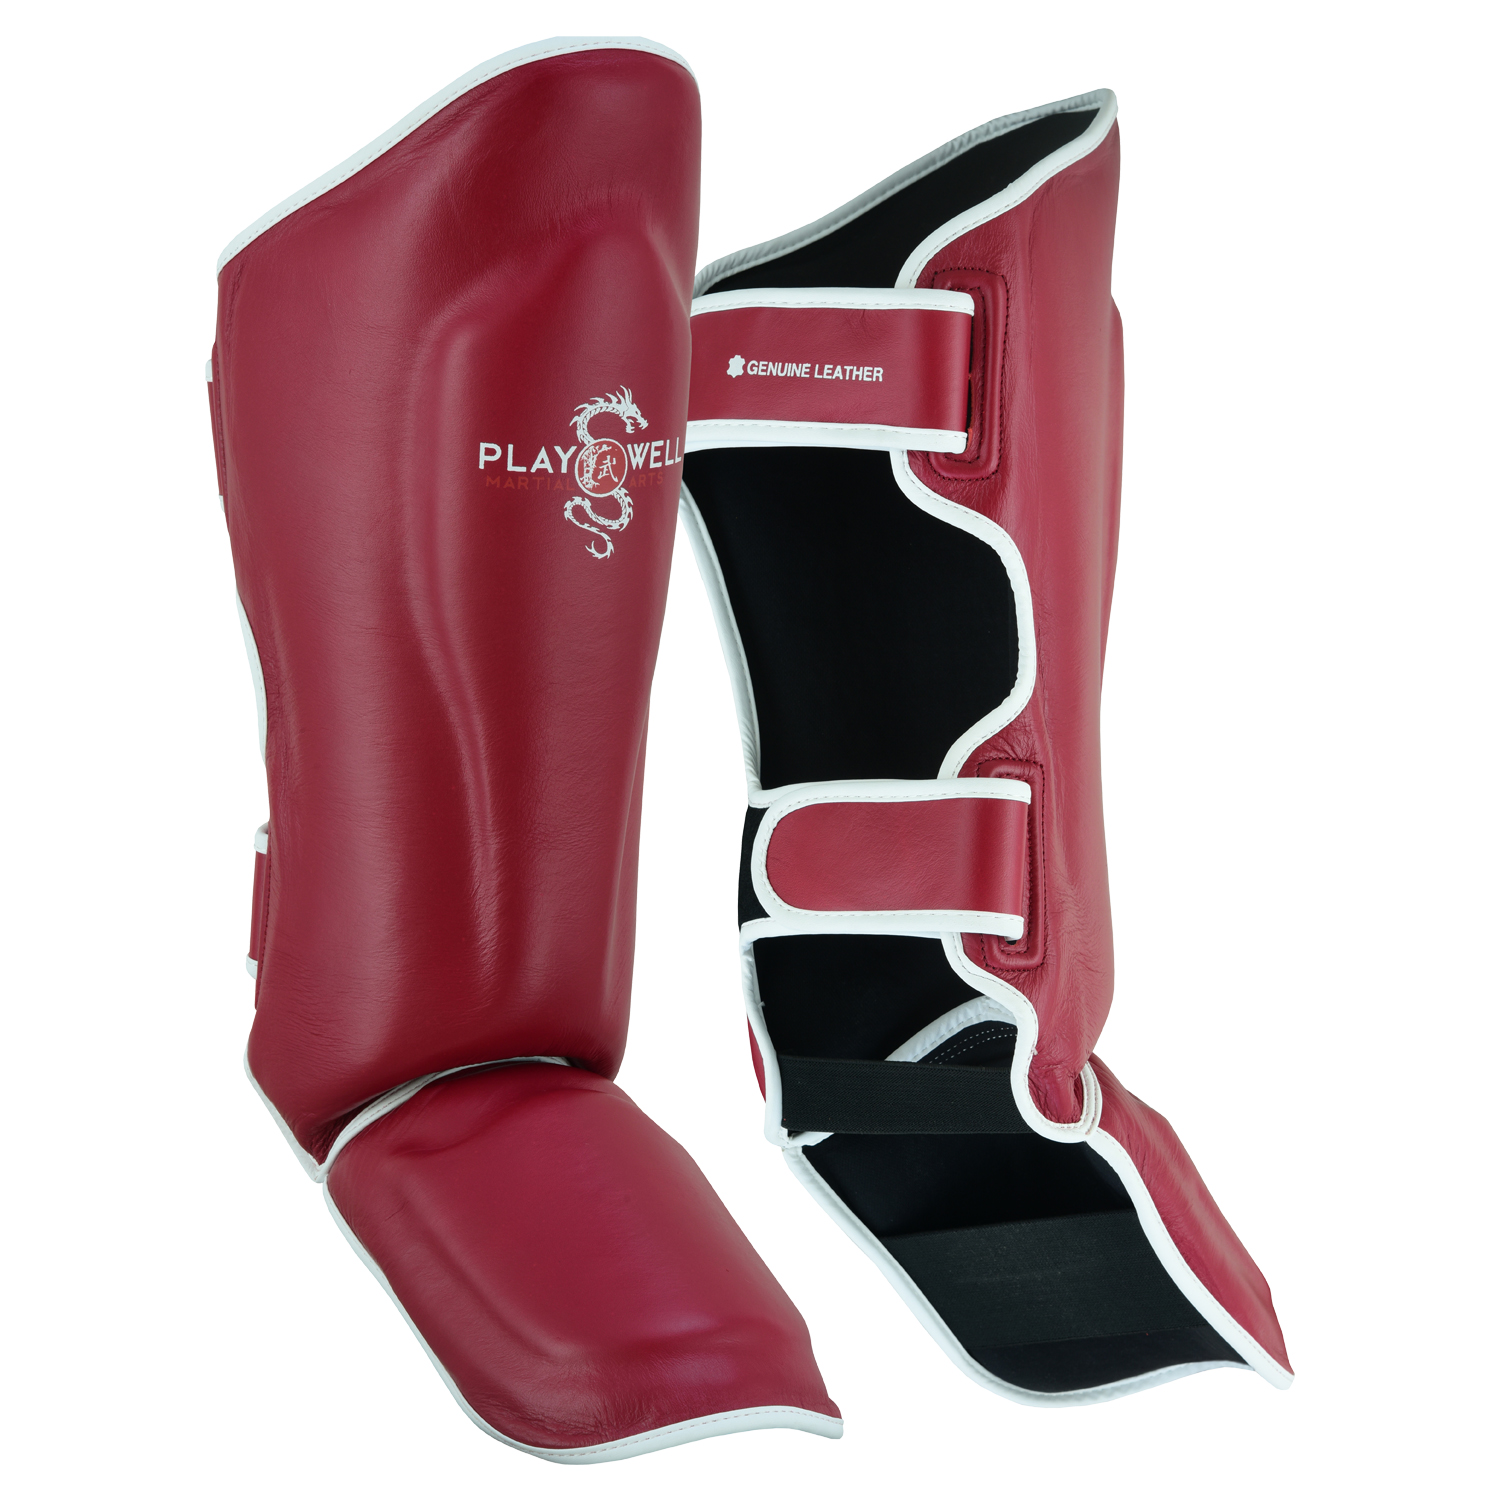 Playwell "Maroon Series" Leather Muay Thai Shin Instep Guards - Click Image to Close